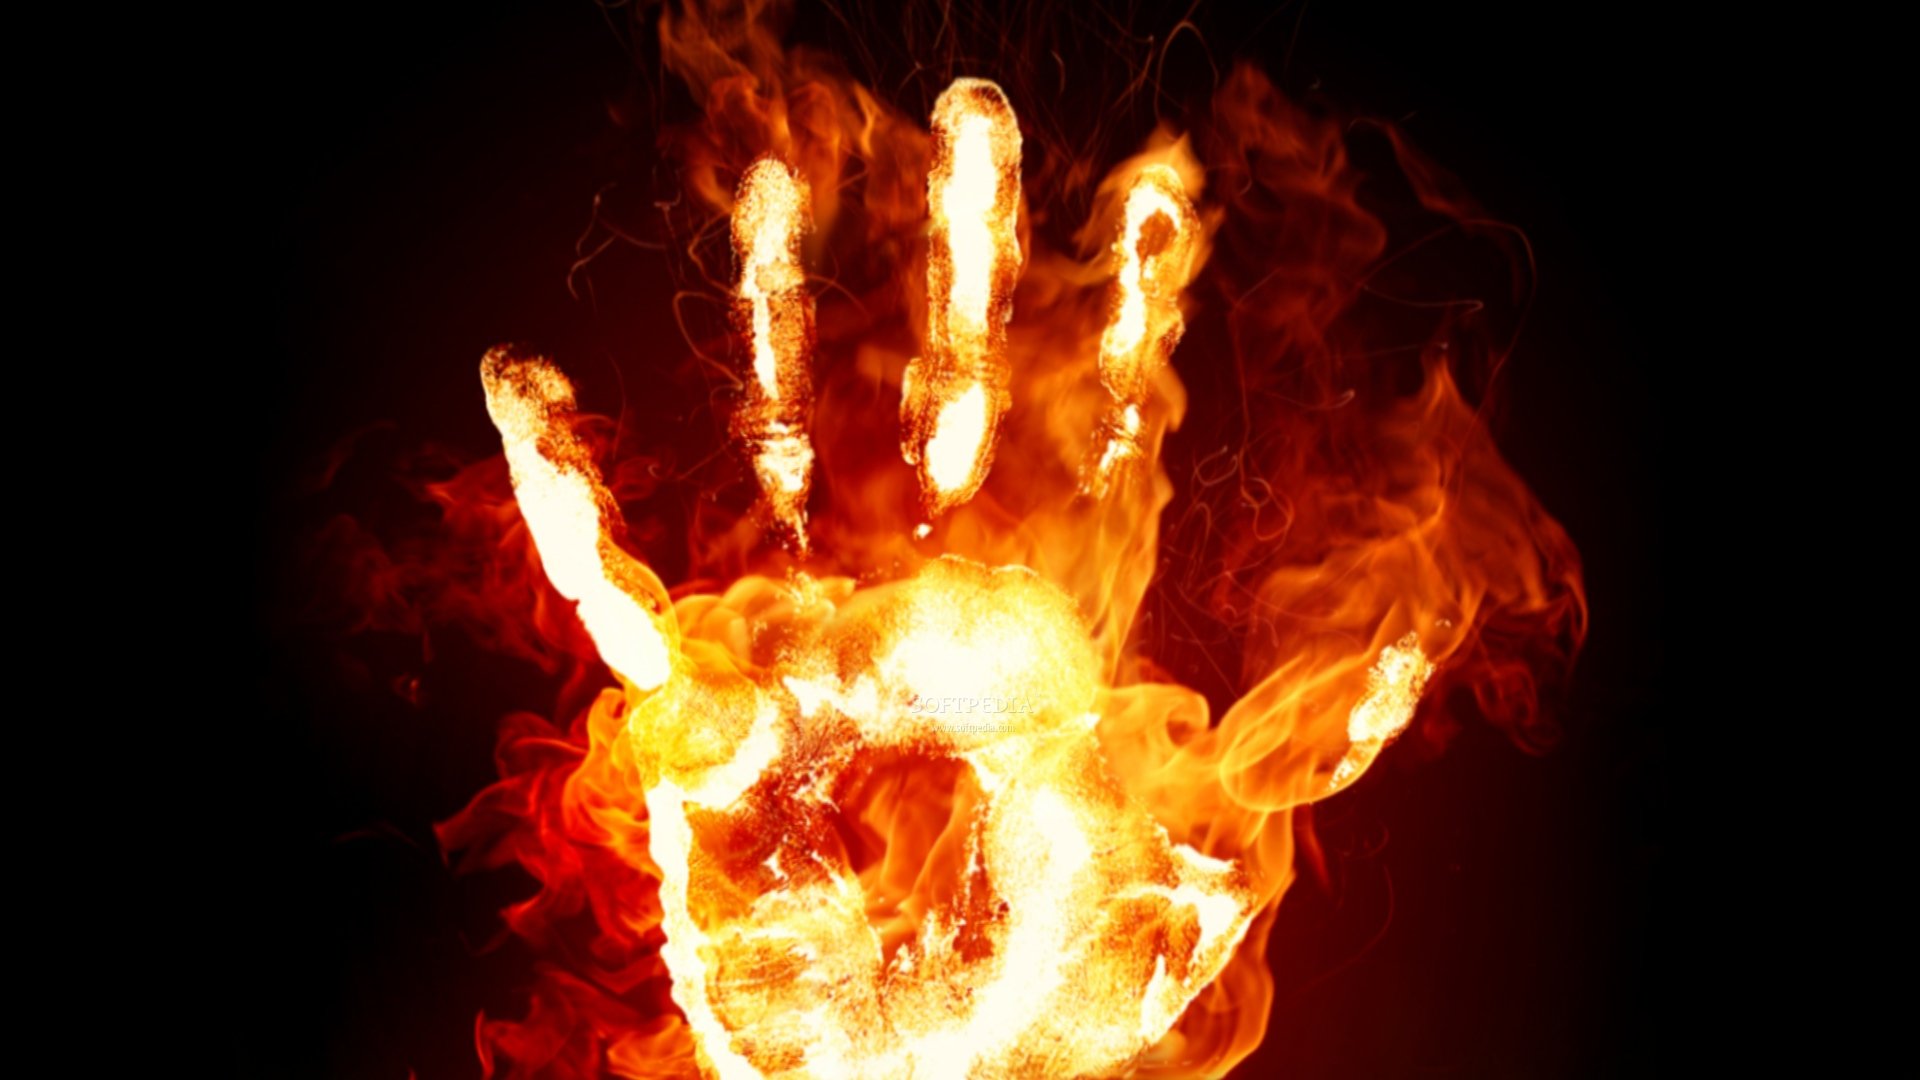 Woman put on fire allegedly by in-laws | Pakistan Today